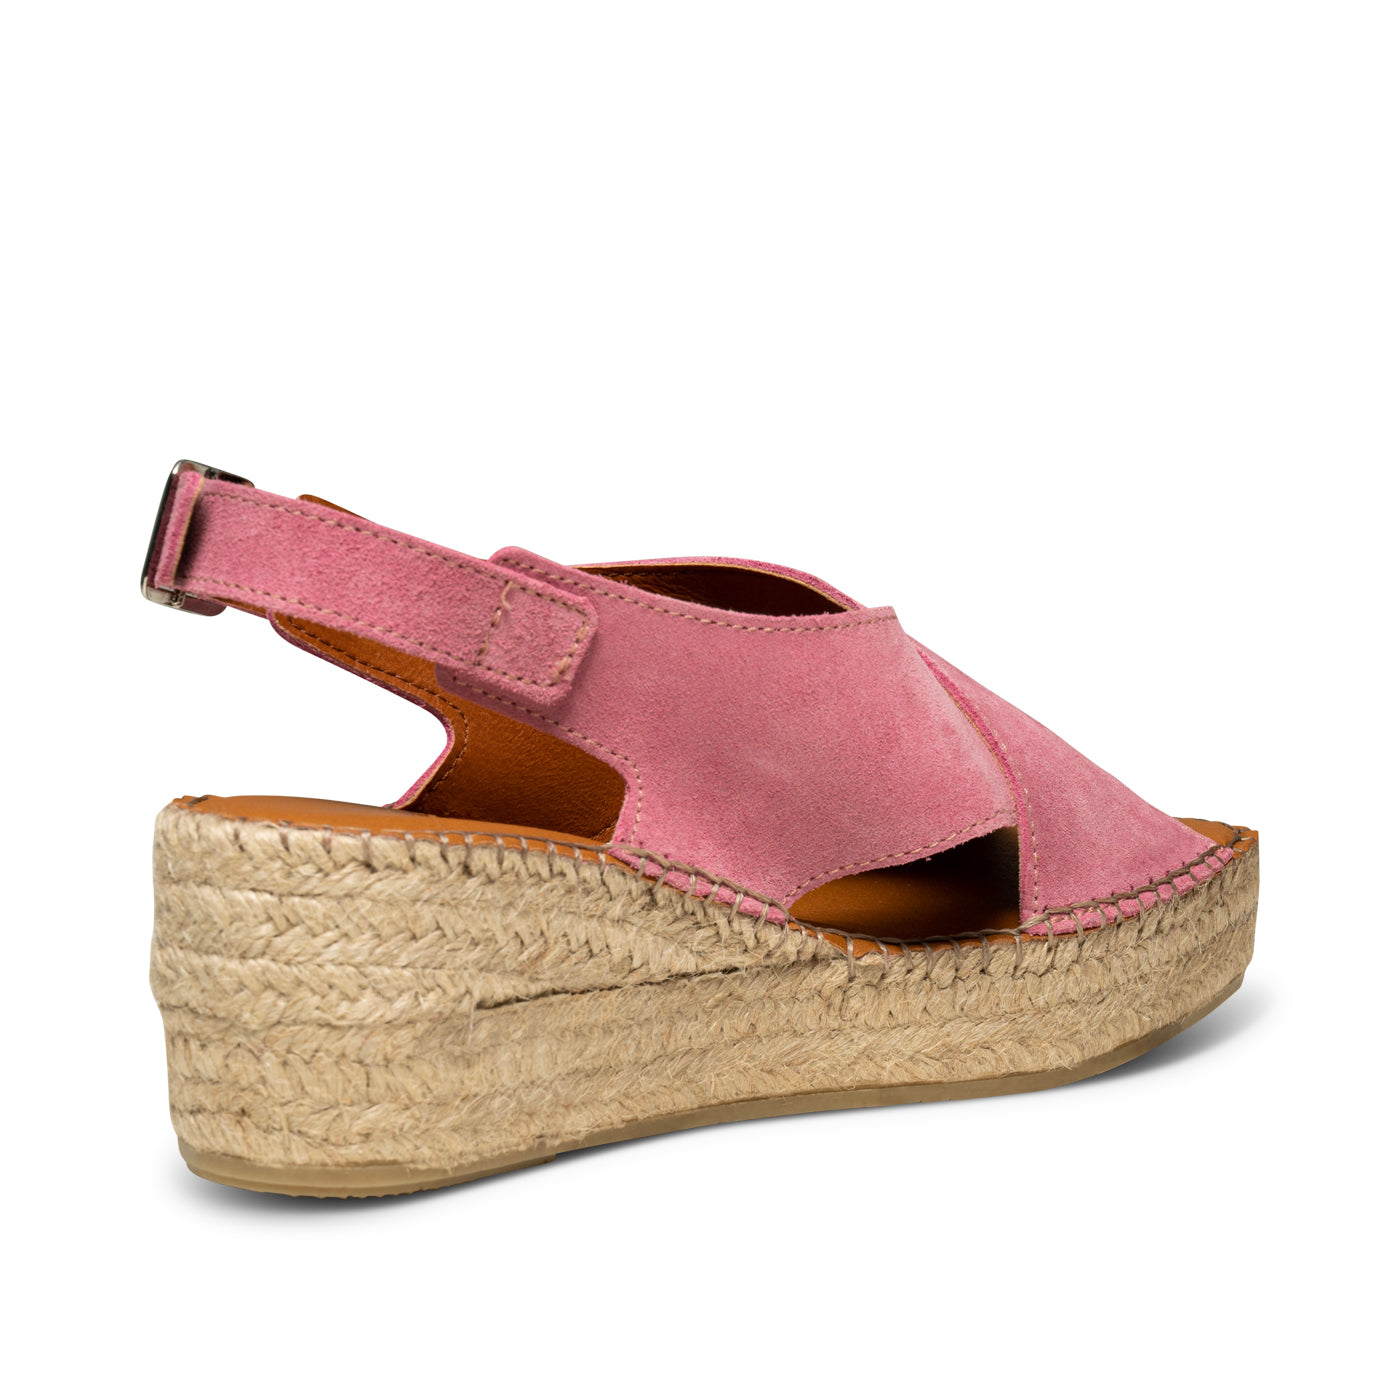 SHOE THE BEAR WOMENS Orchid wedge suede Espadrilles 761 Soft Pink